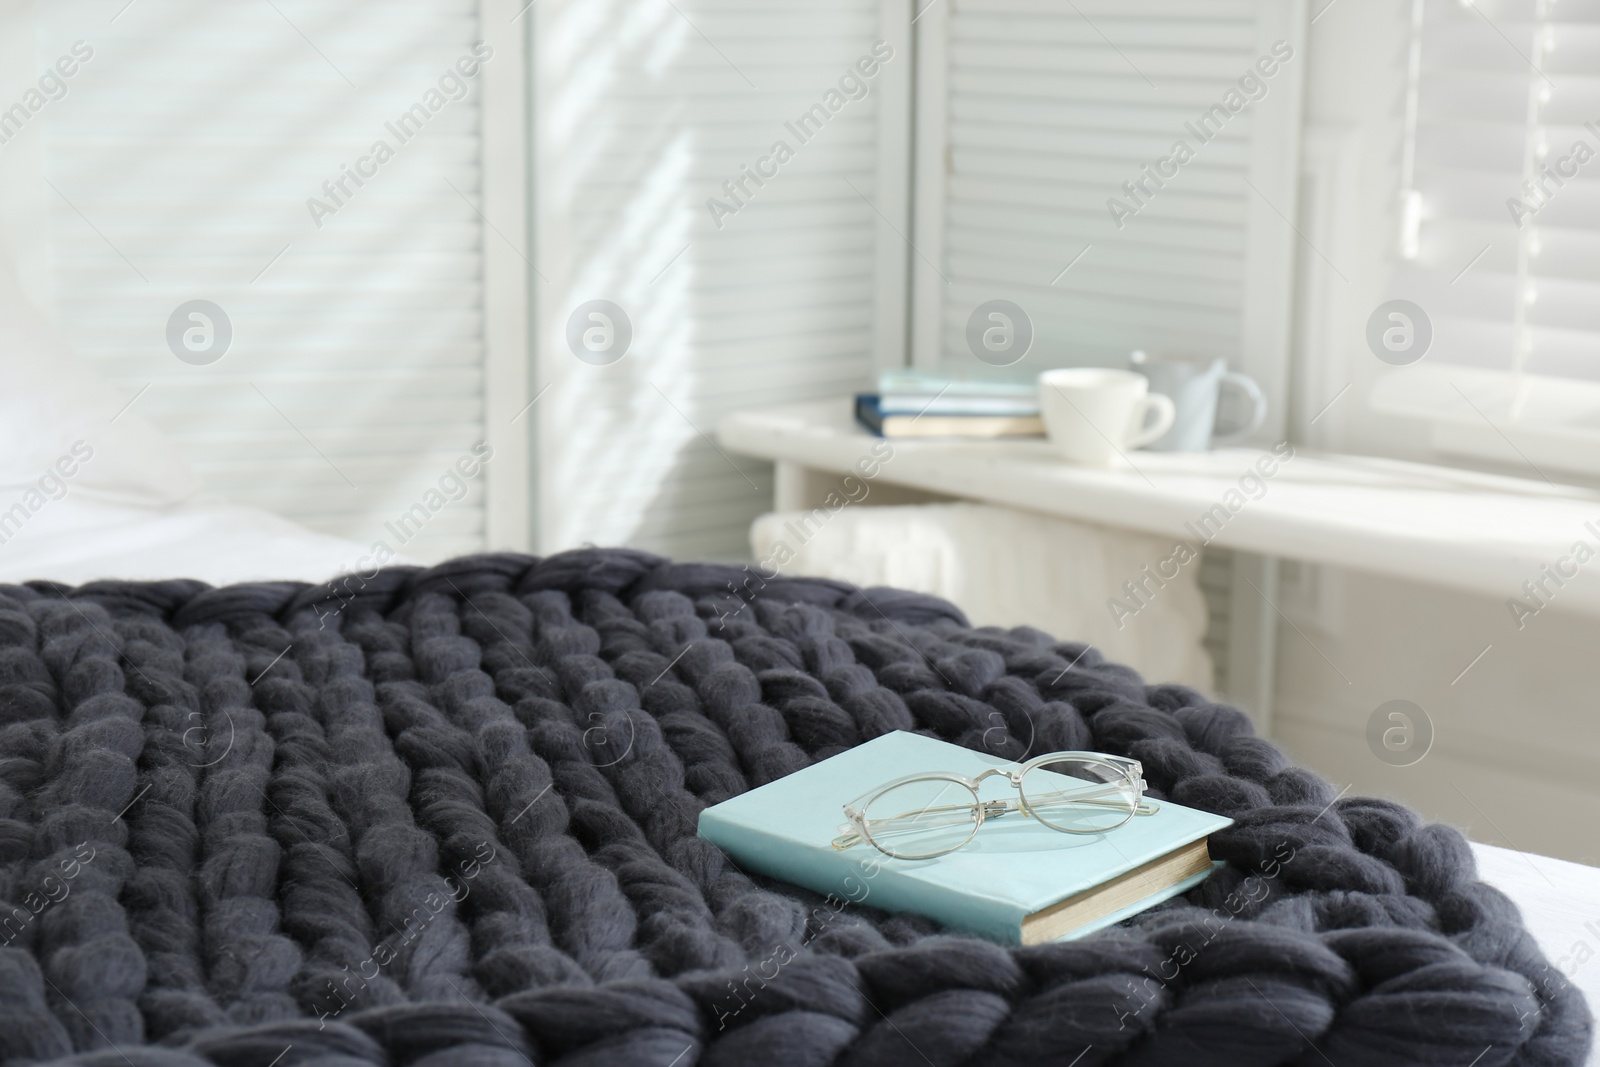 Photo of Book and glasses on knitted merino wool plaid in bedroom, space for text